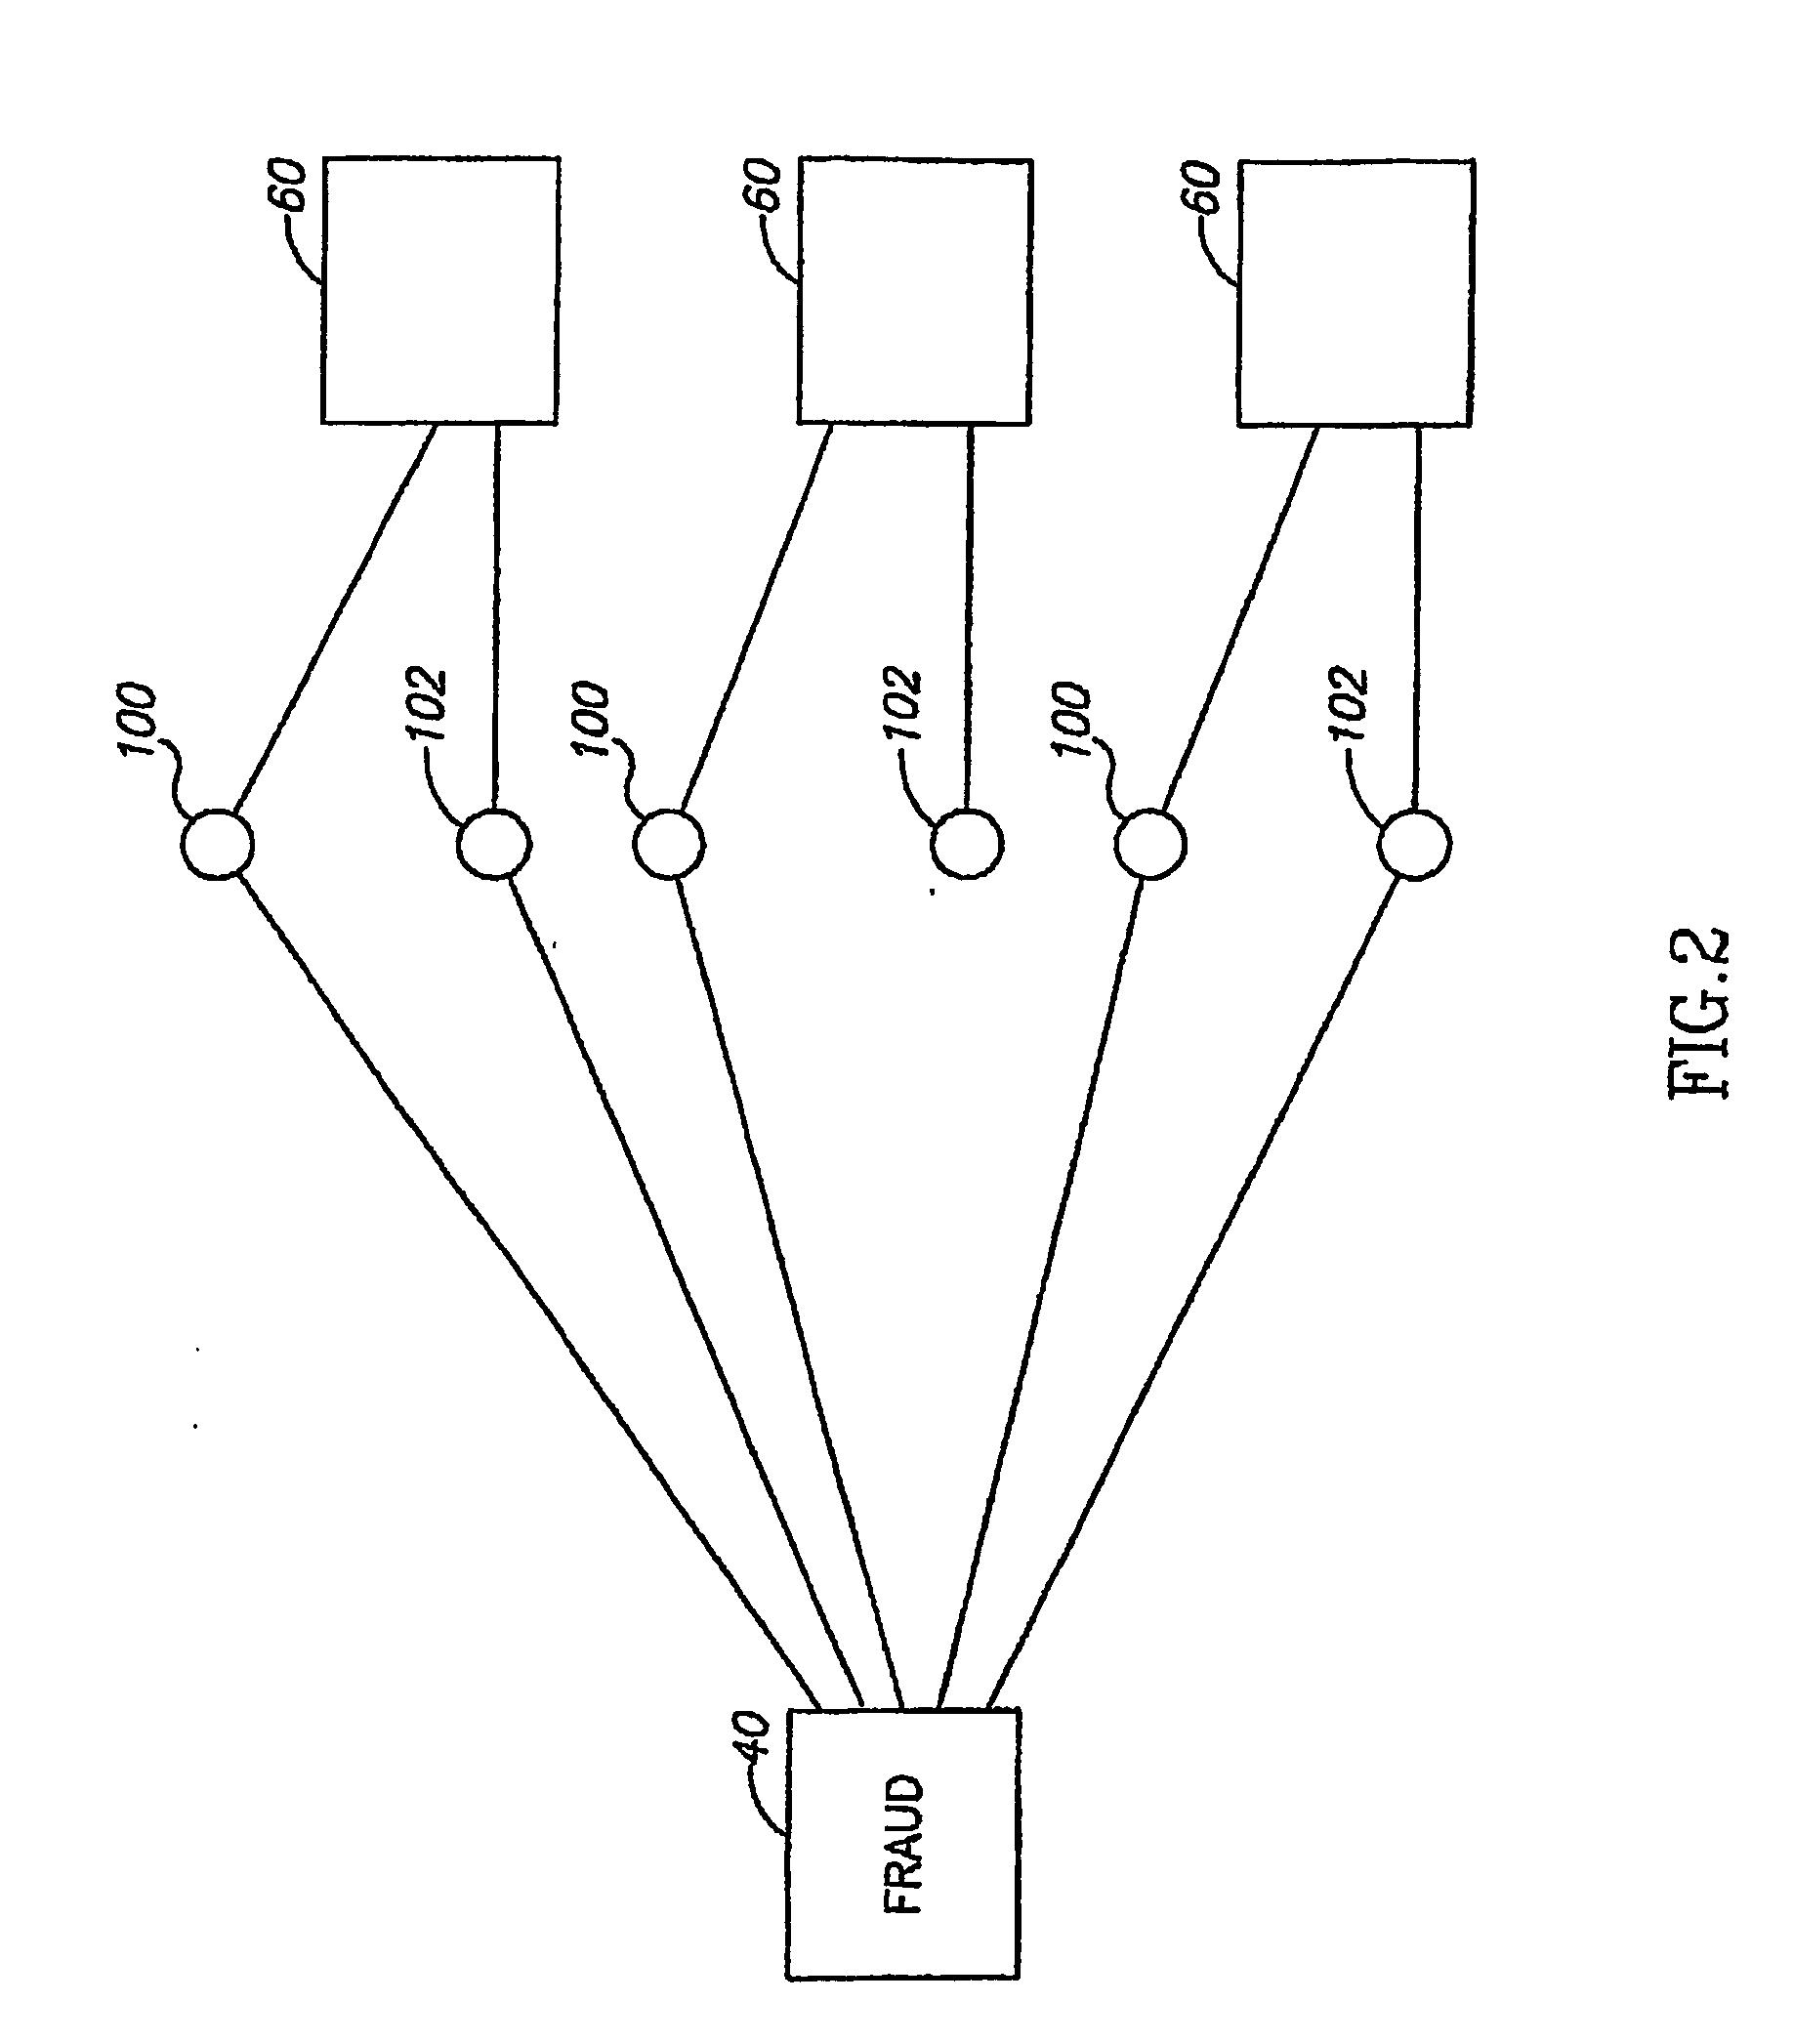 System and Method of Addressing Email and Electronic Communication Fraud